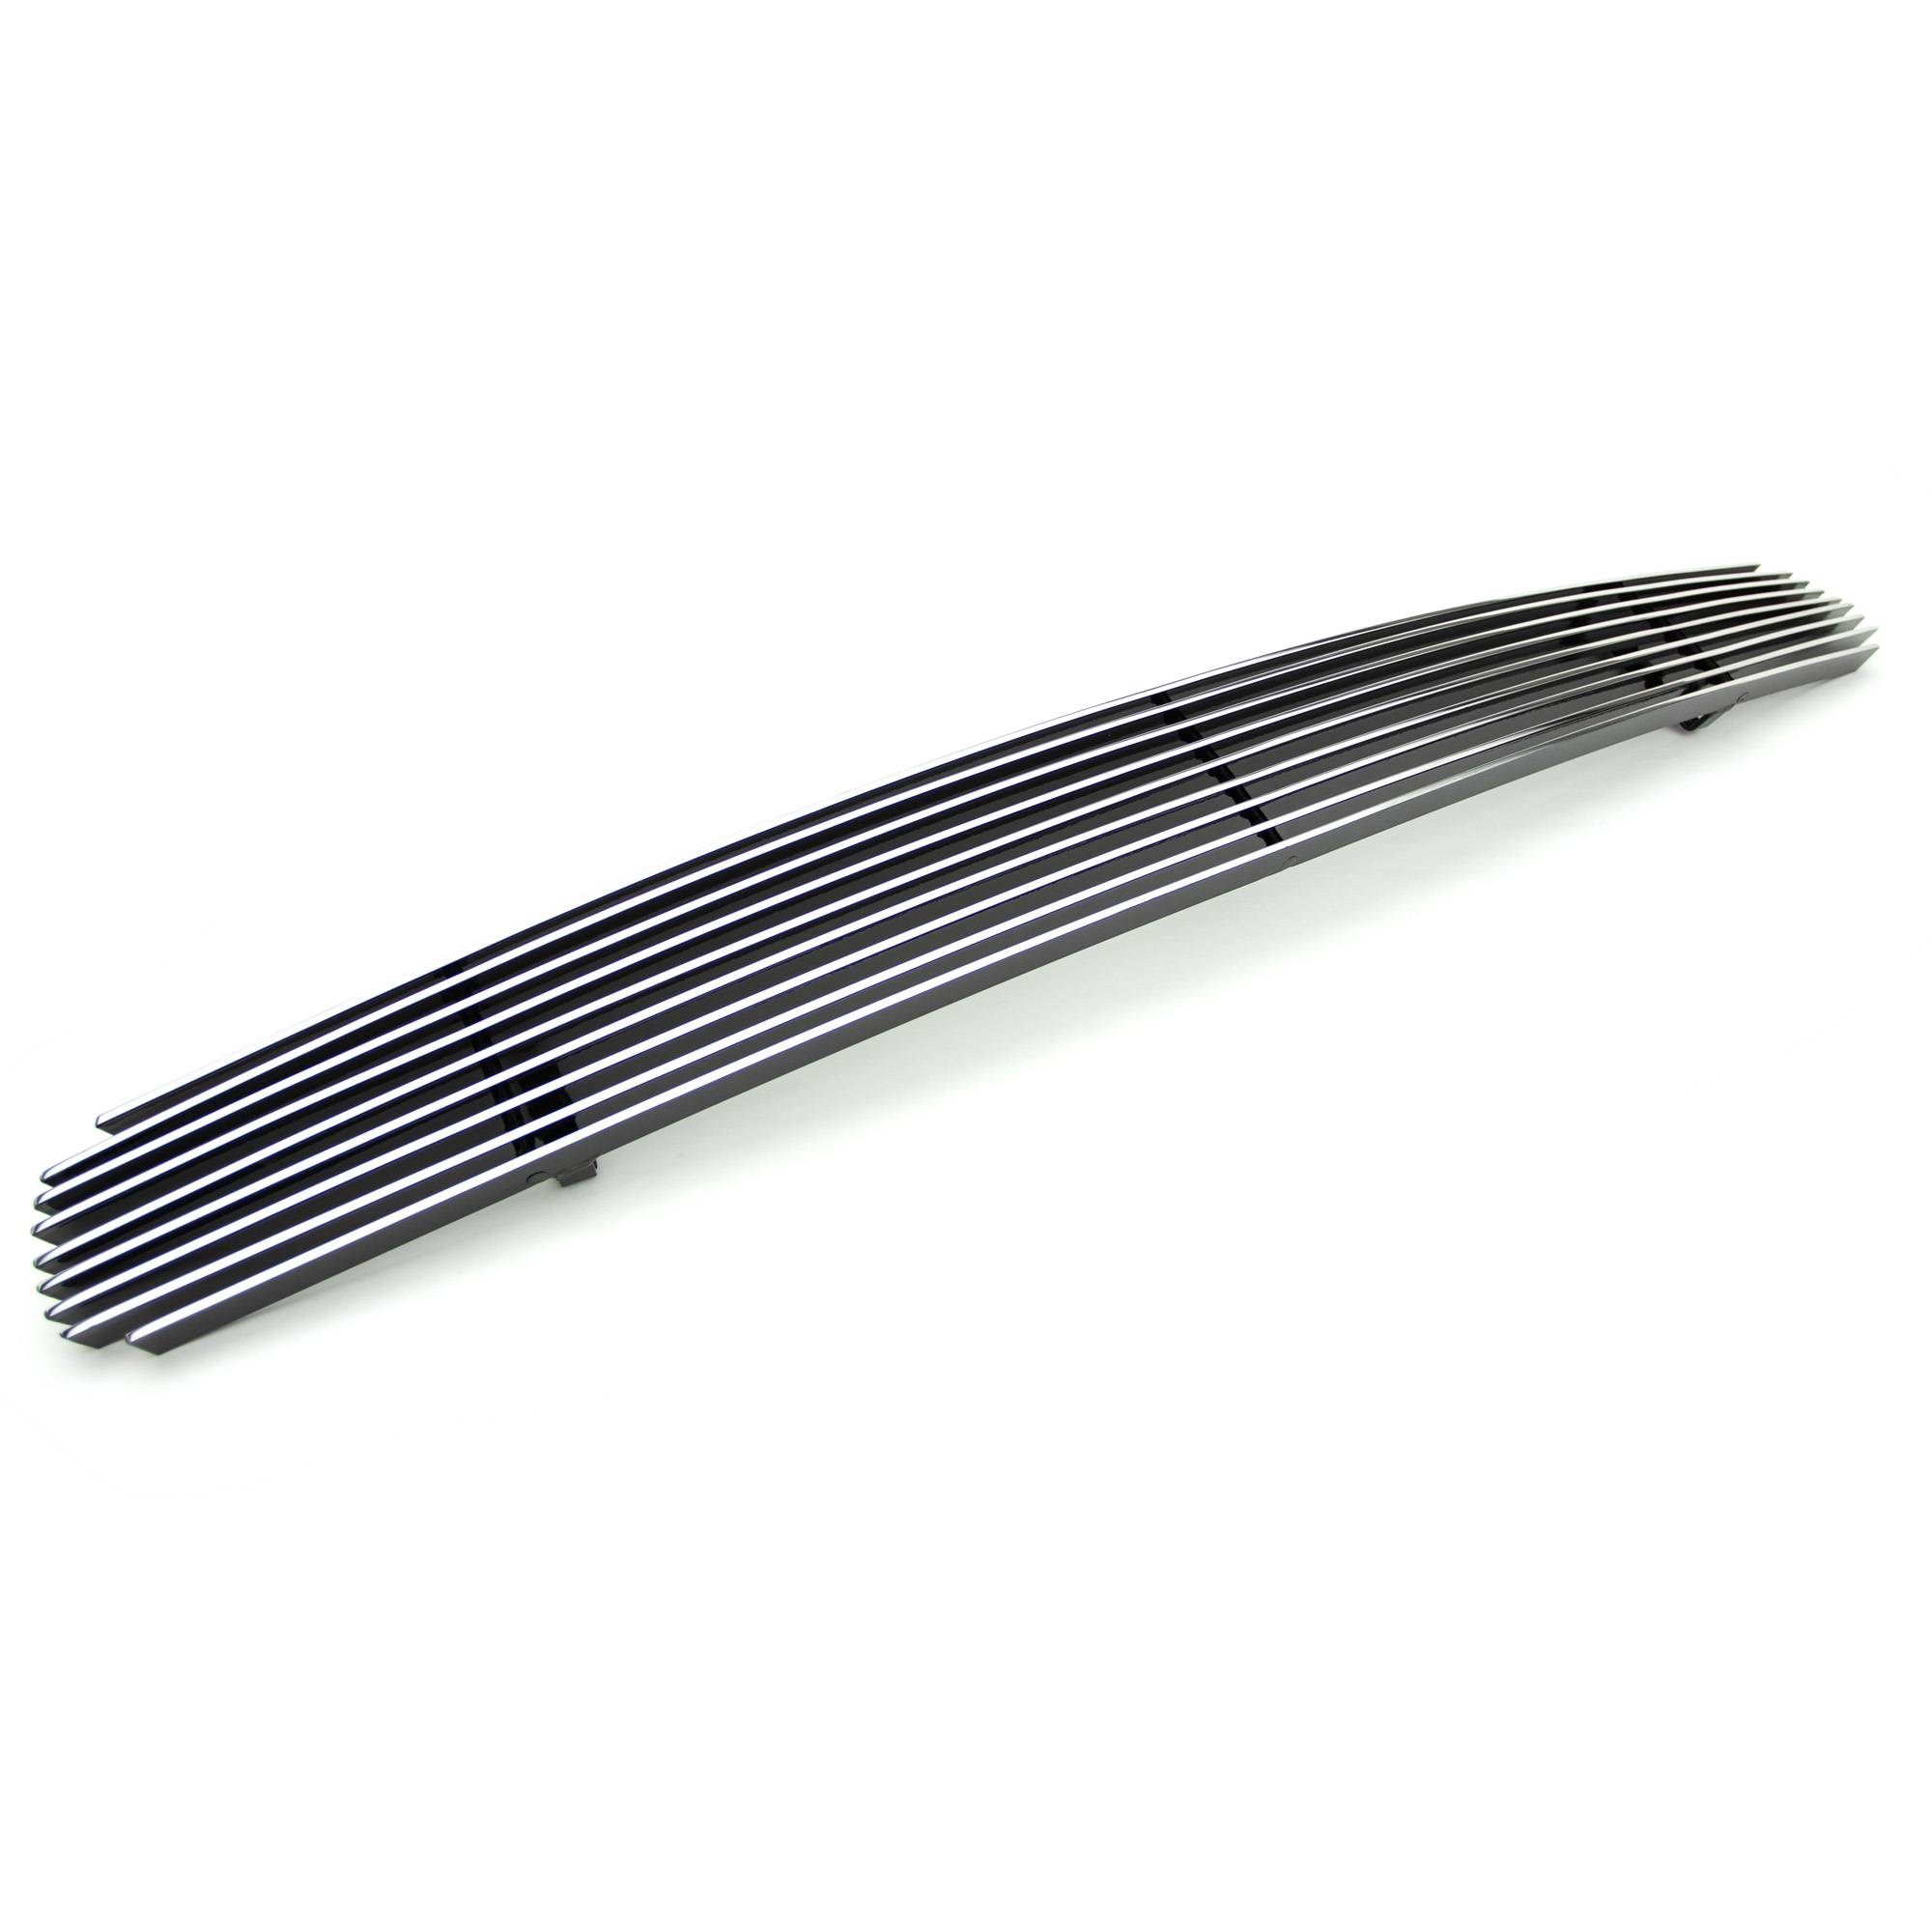 A-PADS Polished REPLACEMENT Billet Grille for 2001 2002 2003 2004 2005 2006 2007 2008 2009 GMC ENVOY 1PC UPPER REPLACEEMENT